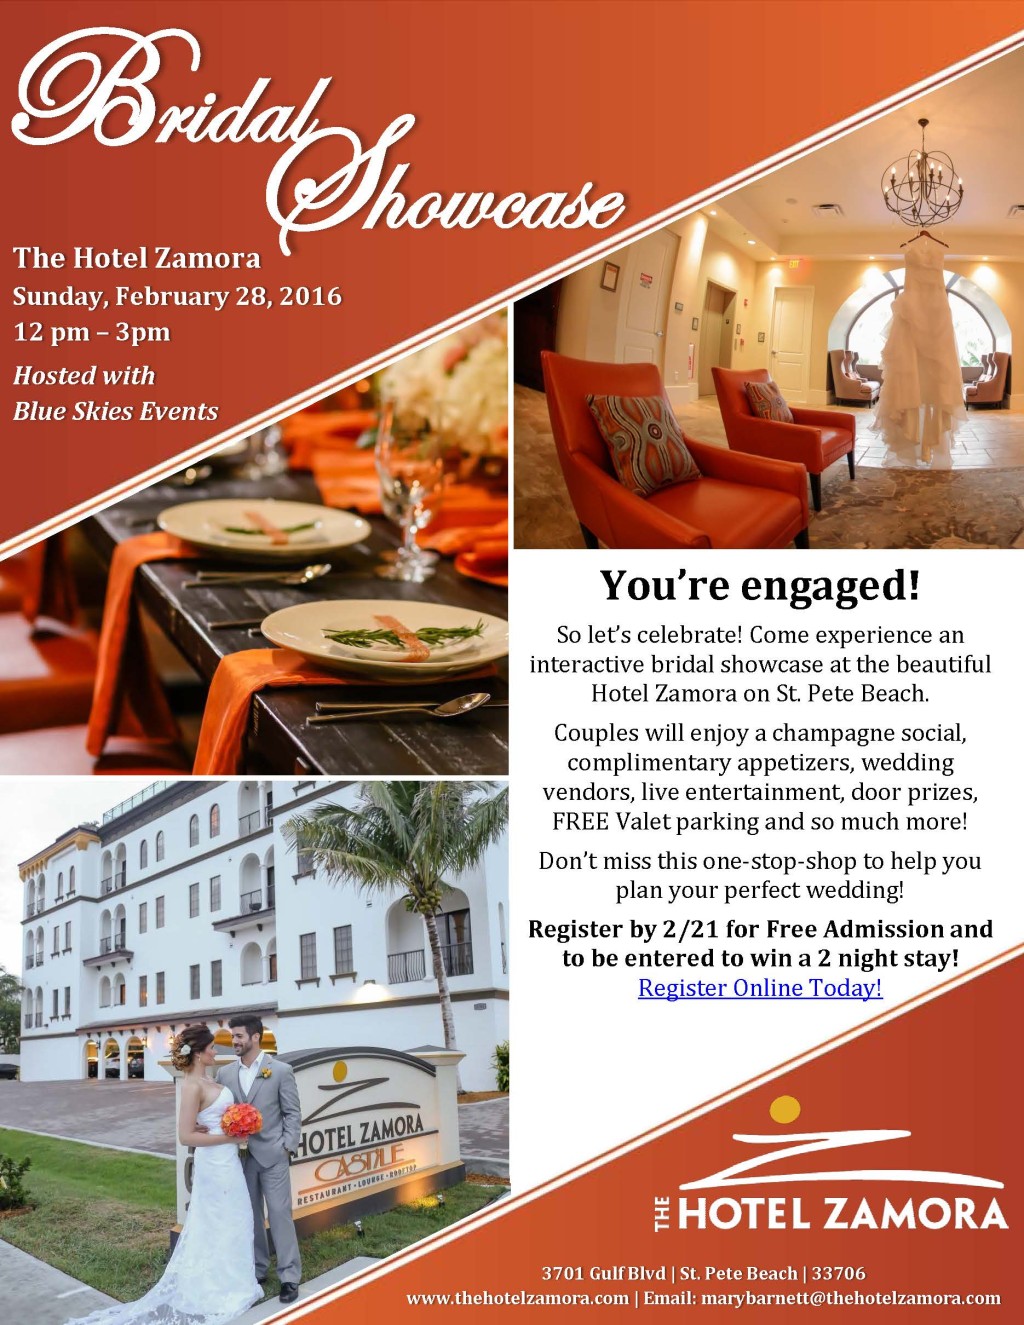 Tampa Bay Area Bridal Show at The Hotel Zamora Wedding Venue in St. Pete Beach hosted with Blue Skies Events Bridal Showcase in February with Gowns Flowers Venues Entertainment Decor & Photography Vendors in Tampa Clearwater Brandon St Petersburg